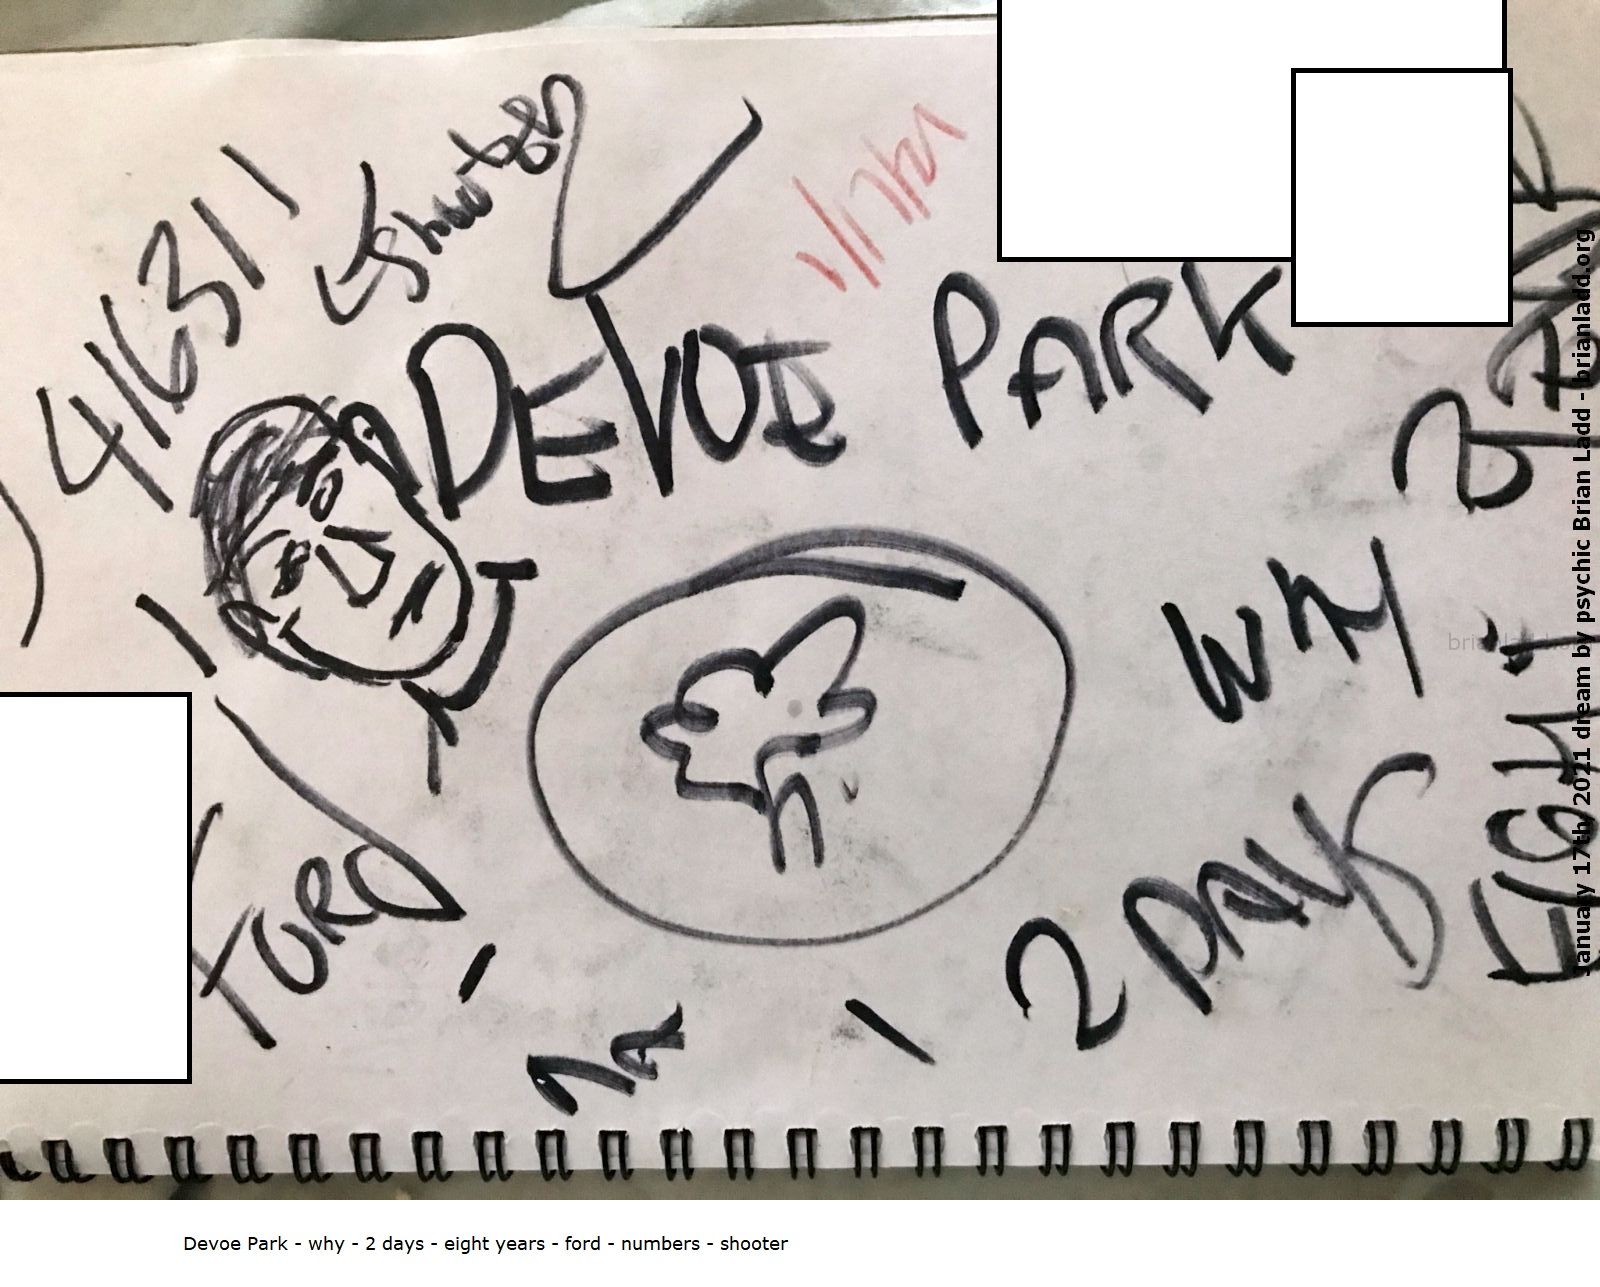 17 January 2021 3 - Devoe Park - Why - 2 Days - Eight Years - Ford - Numbers - Shooter...
Devoe Park - Why - 2 Days - Eight Years - Ford - Numbers - Shooter.
